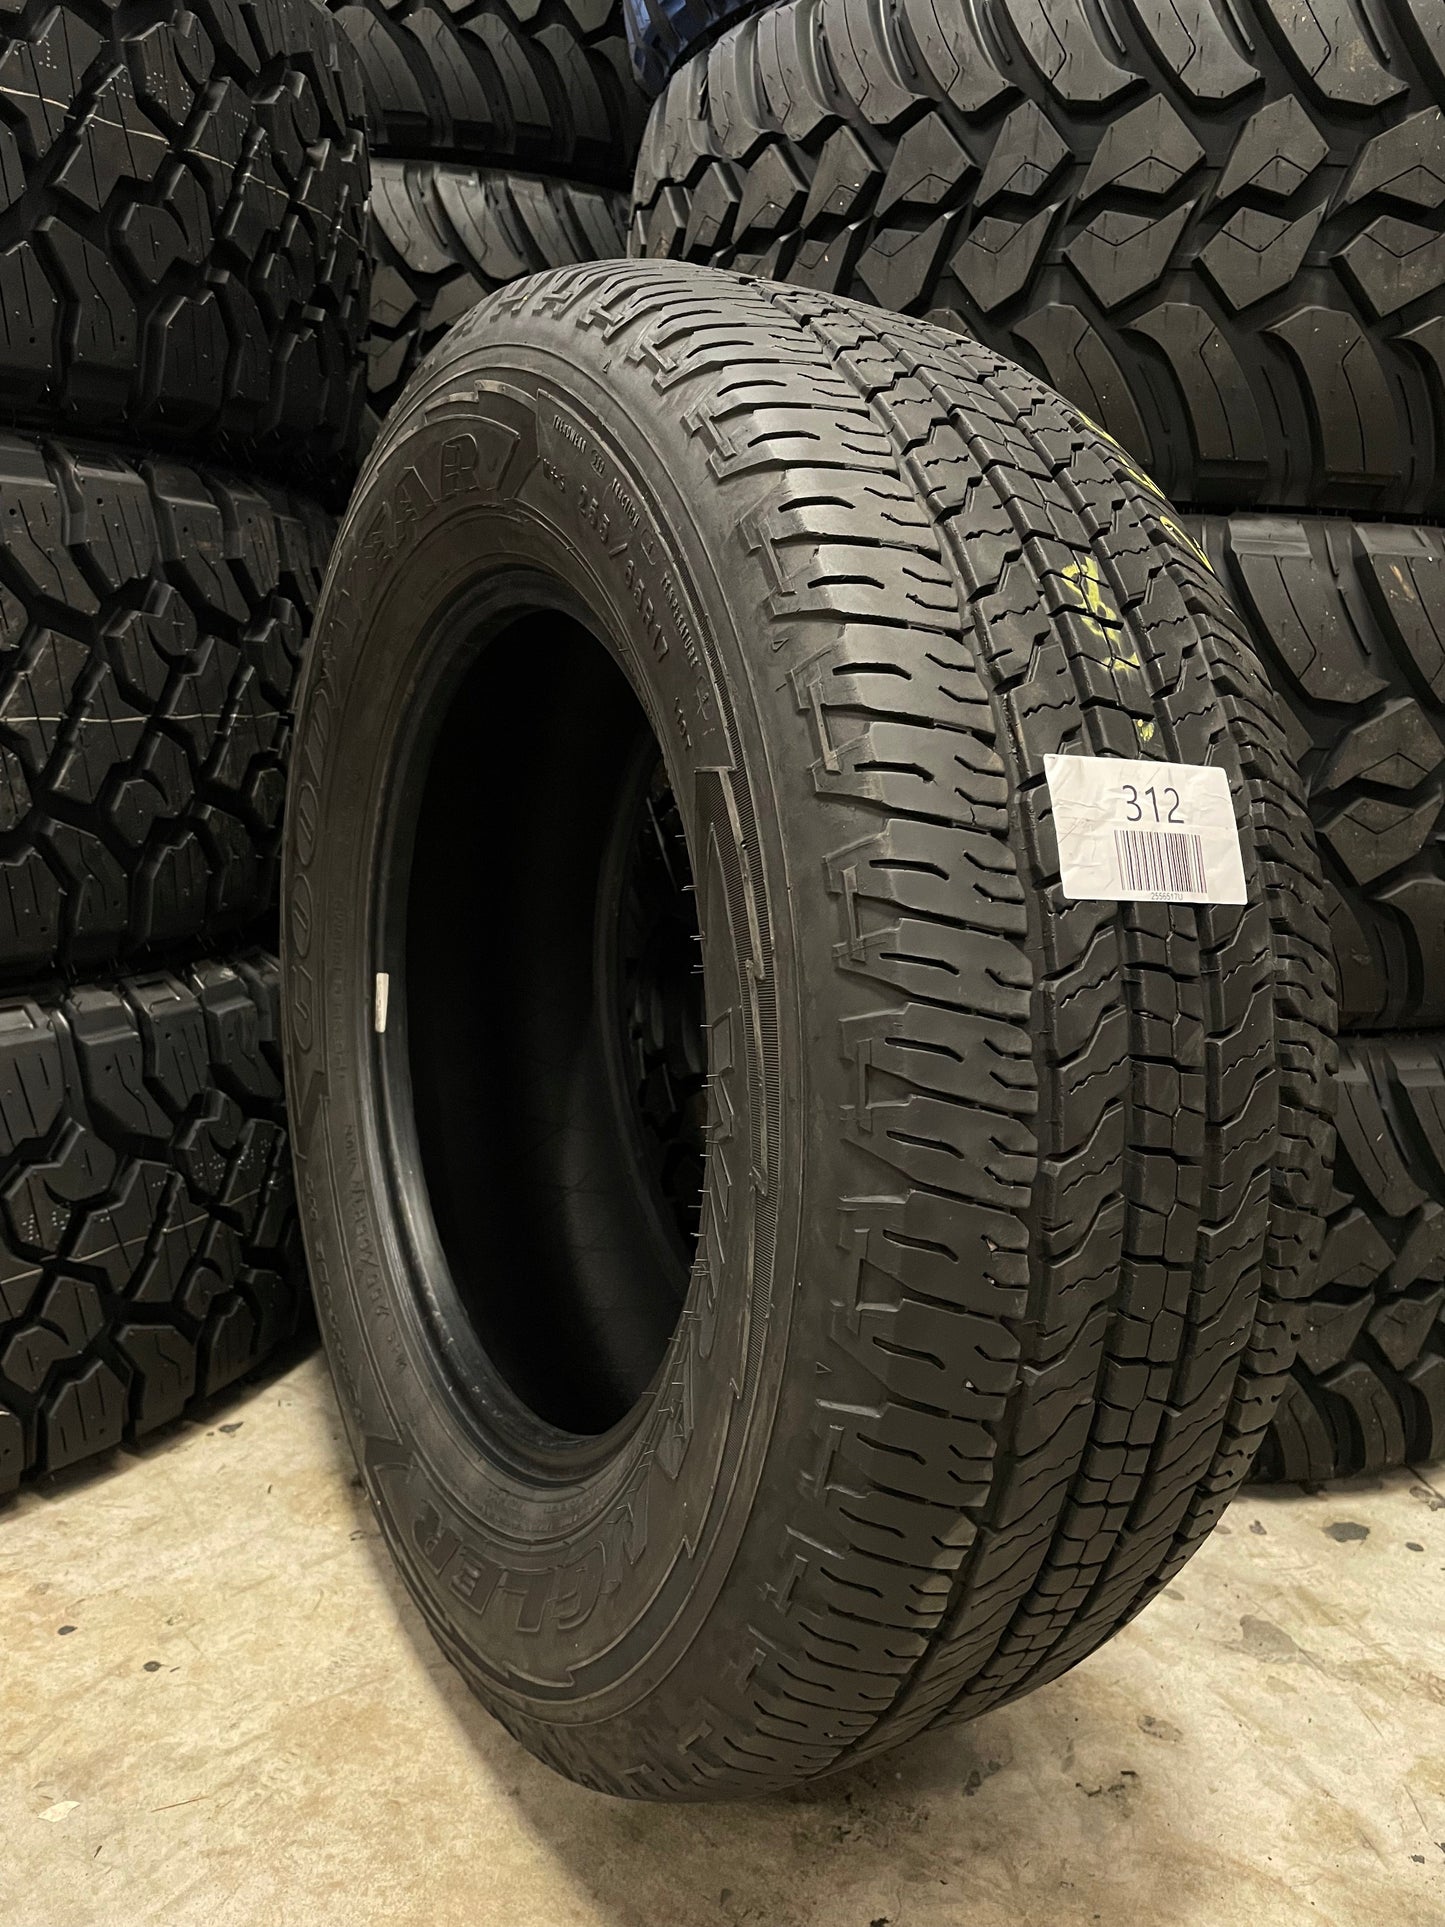 SINGLE 255/65R17 Goodyear Wrangler Fortitude HT 110 T 2337LBS - Used – High  Tread Used Tires